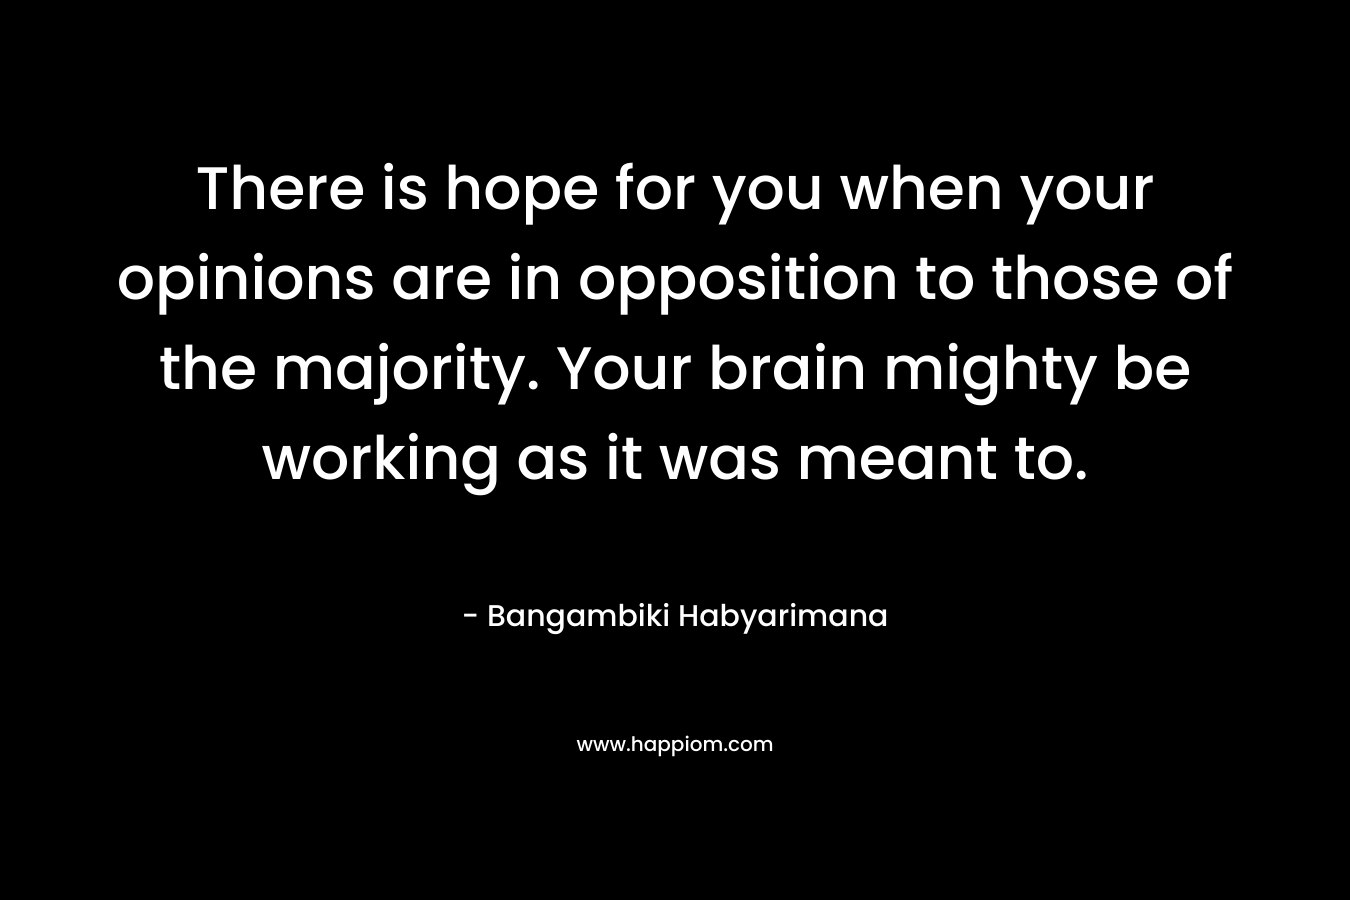 There is hope for you when your opinions are in opposition to those of the majority. Your brain mighty be working as it was meant to.